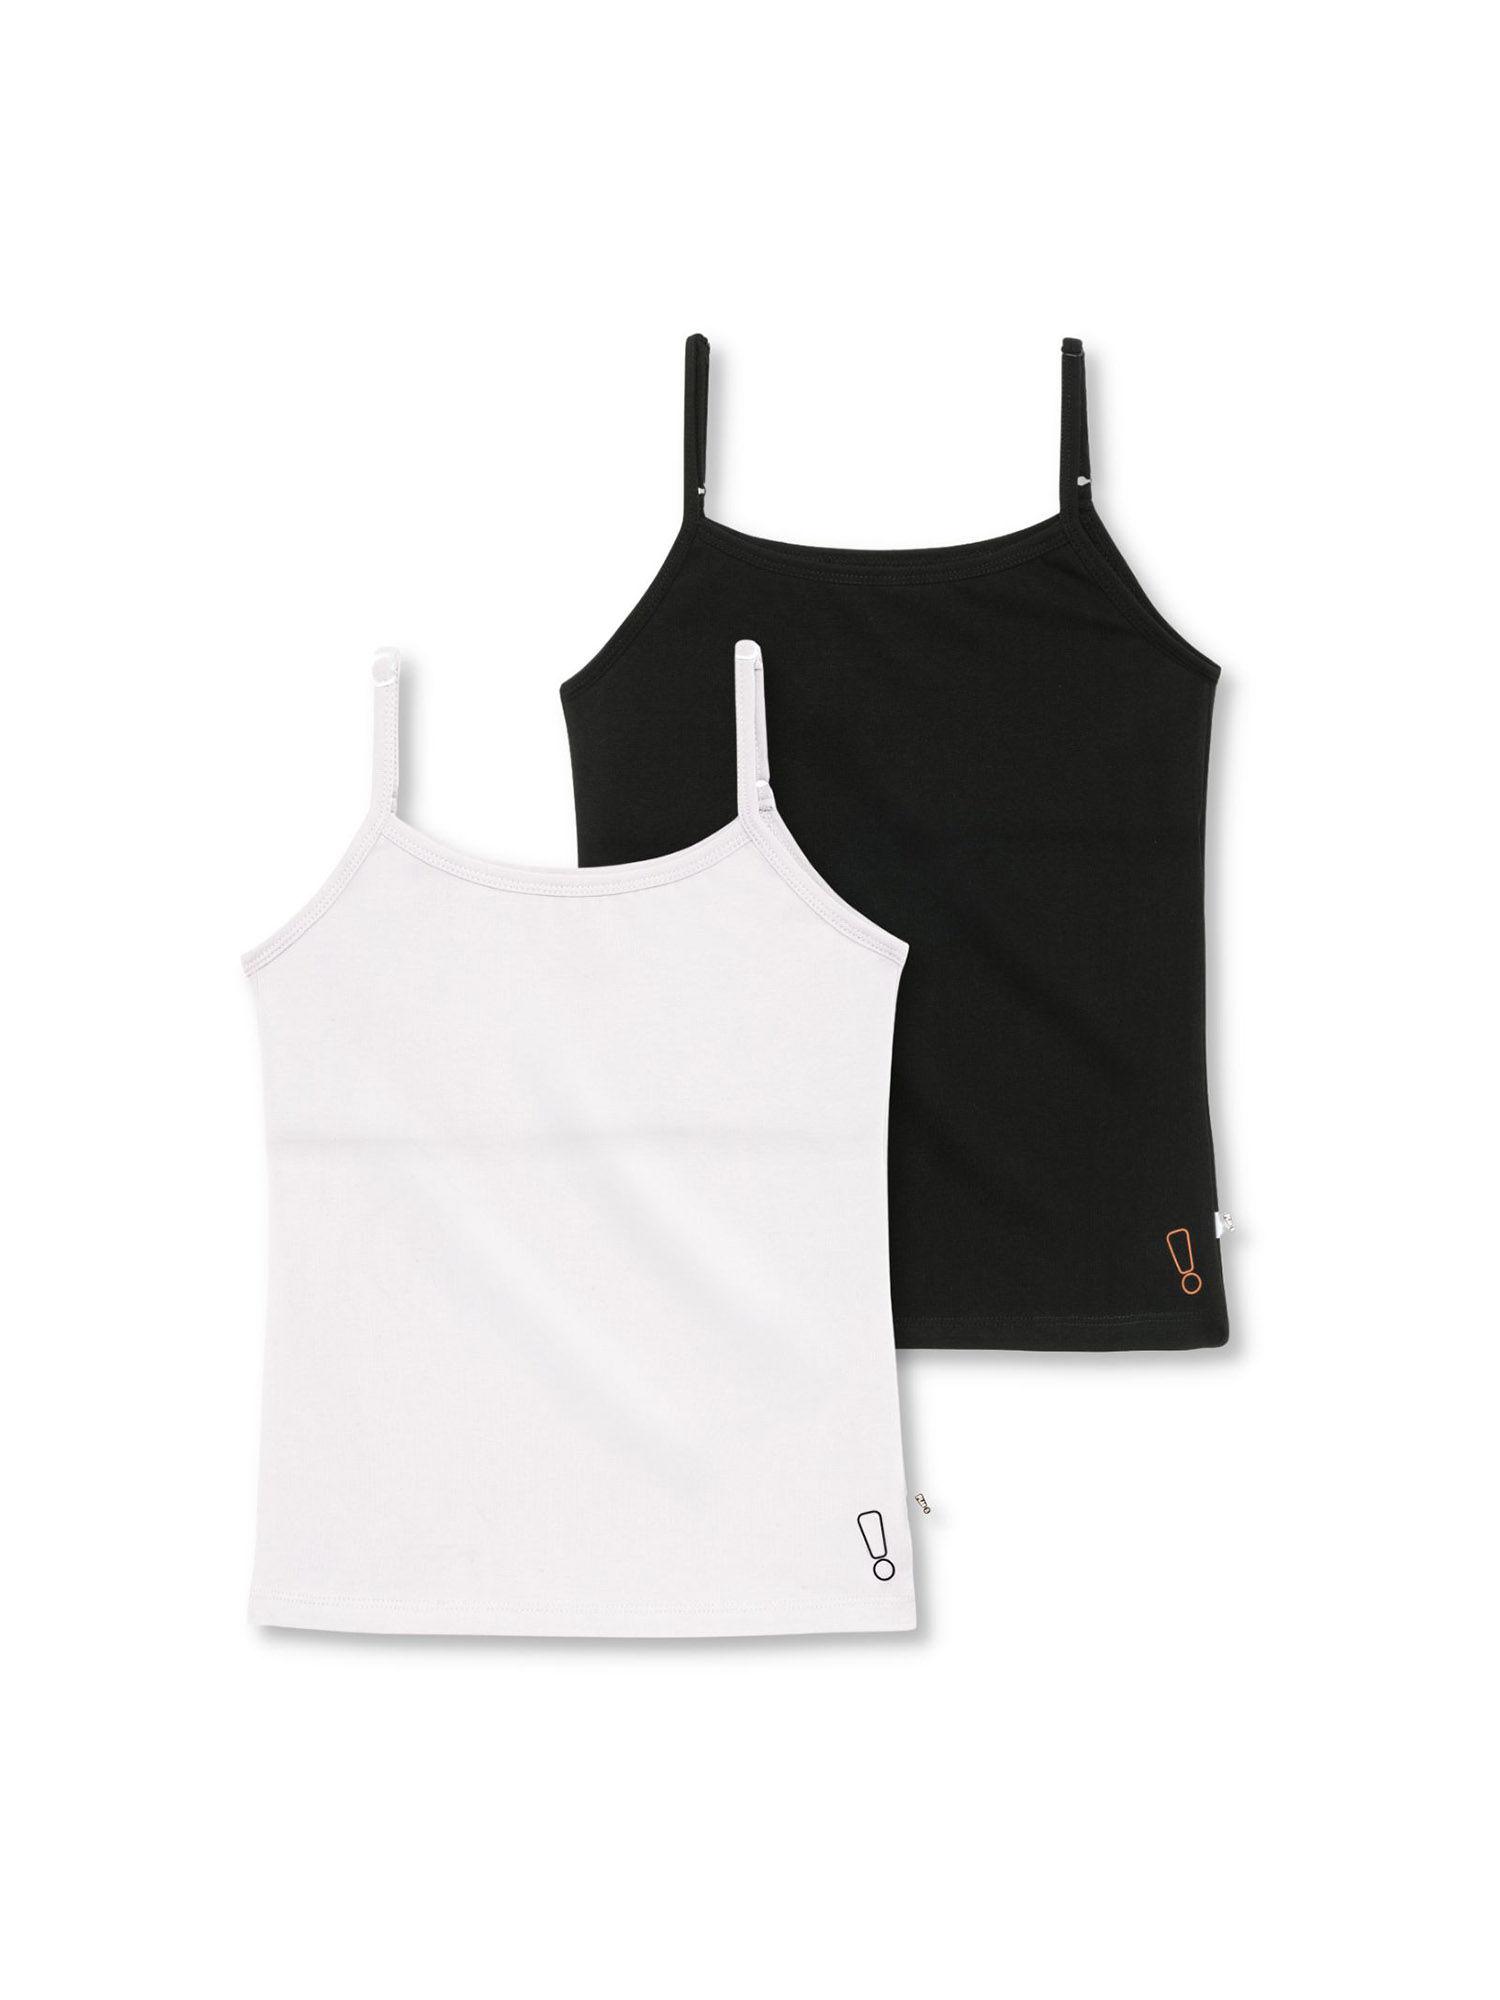 Padded Camisoles (Pack of 2)